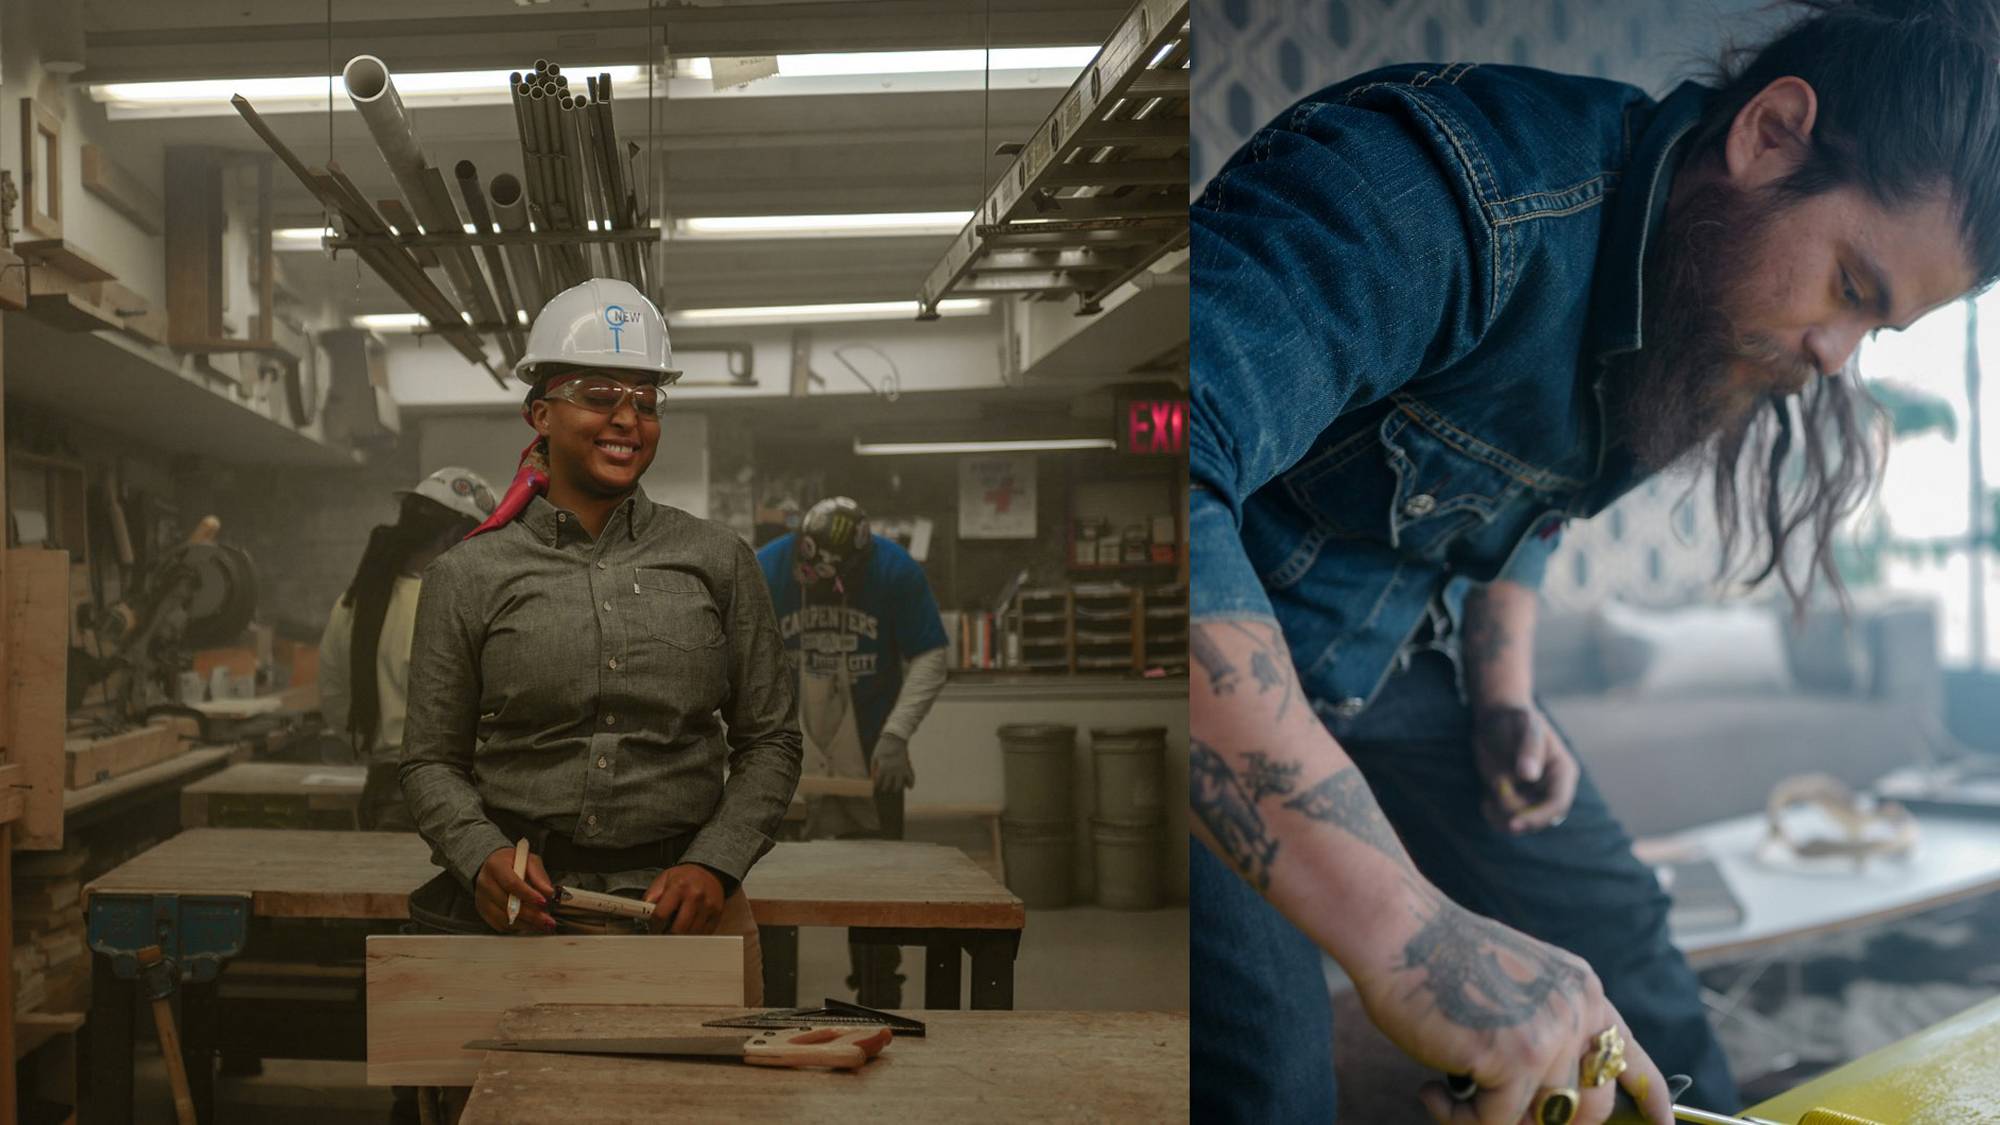 The longevity of levi's, woman working in industry wearing work hat and levi's clothing.